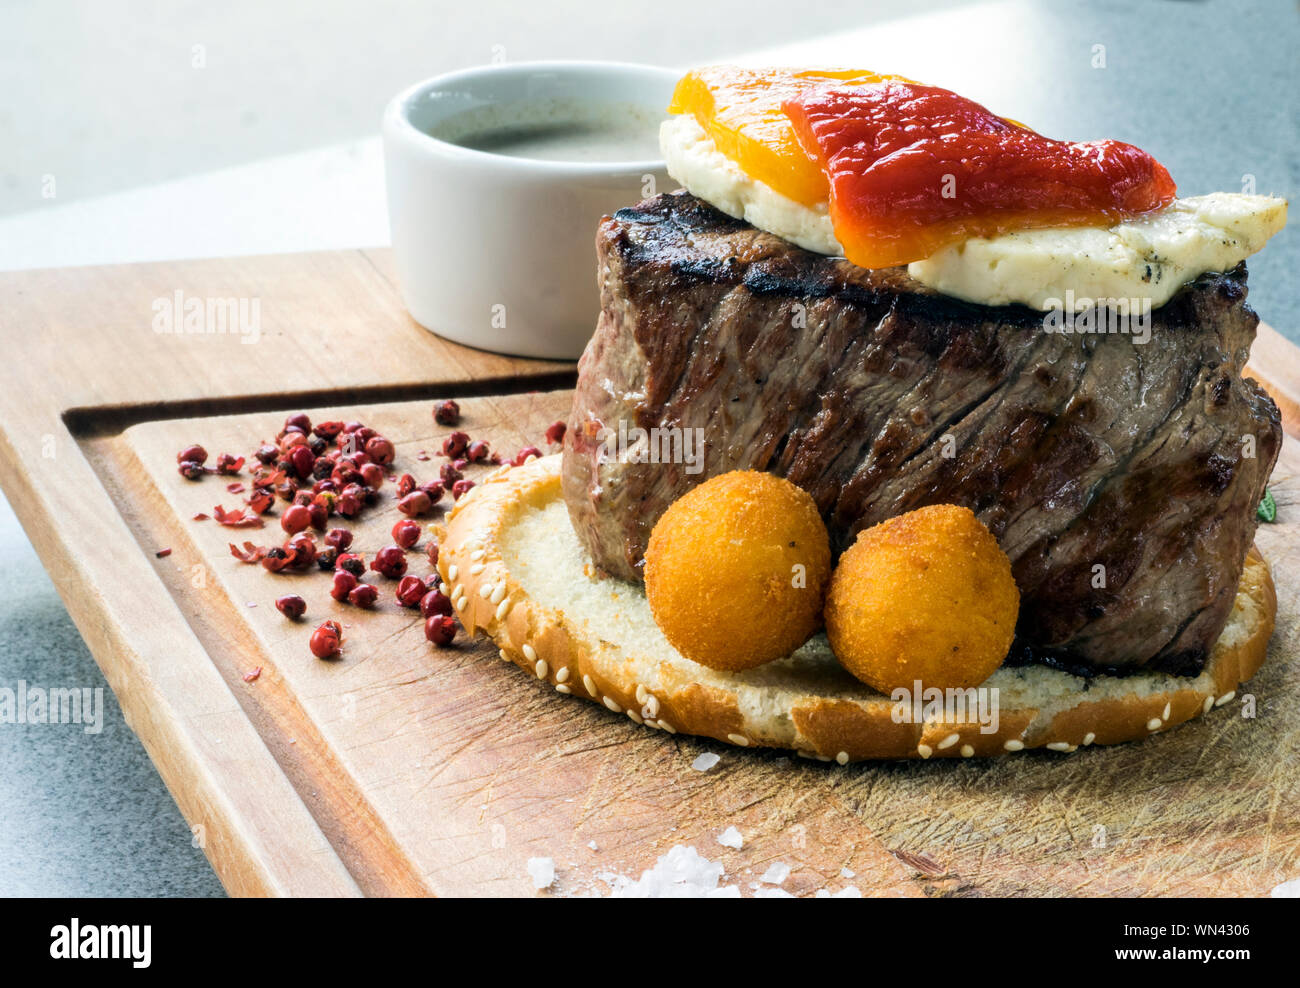 Close-up Of Fresh Filet Mignon Steak With Brynza And Mushroom Sauce On Wooden Cutting Board Stock Photo